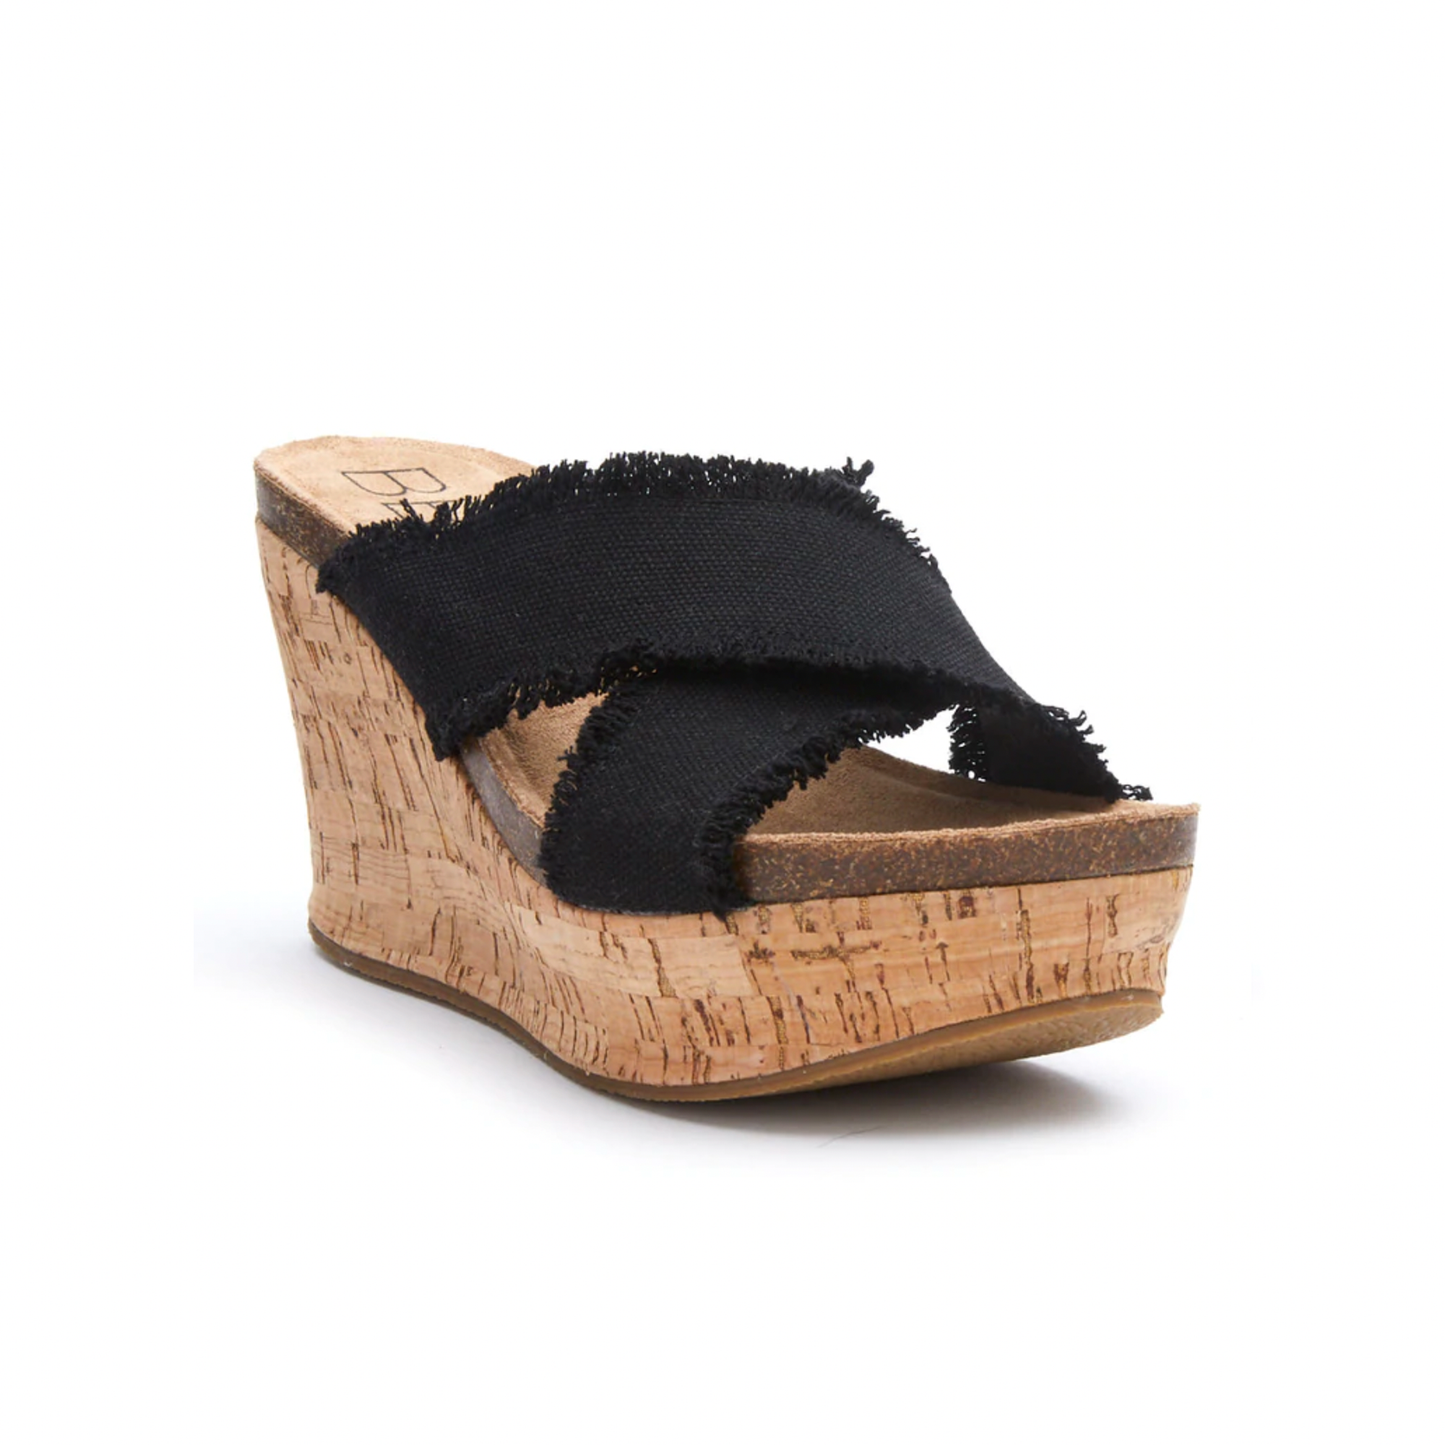 Sea Salt Wedge Sandal. Wander freely looking fabulous with this casual wedge sandal